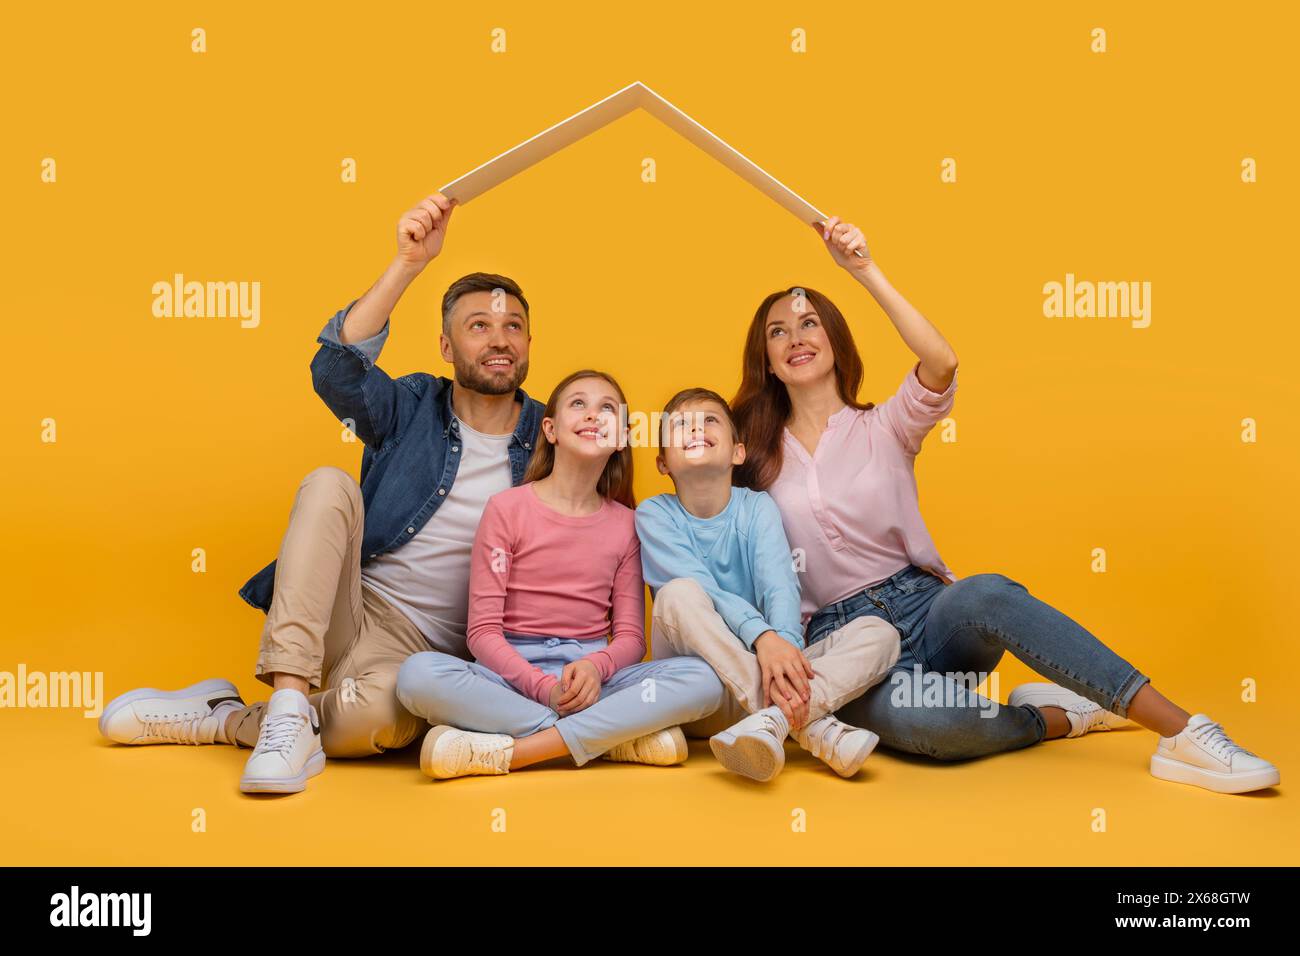 Family of Four Imagining Home Together Against Bright Yellow Background Stock Photo